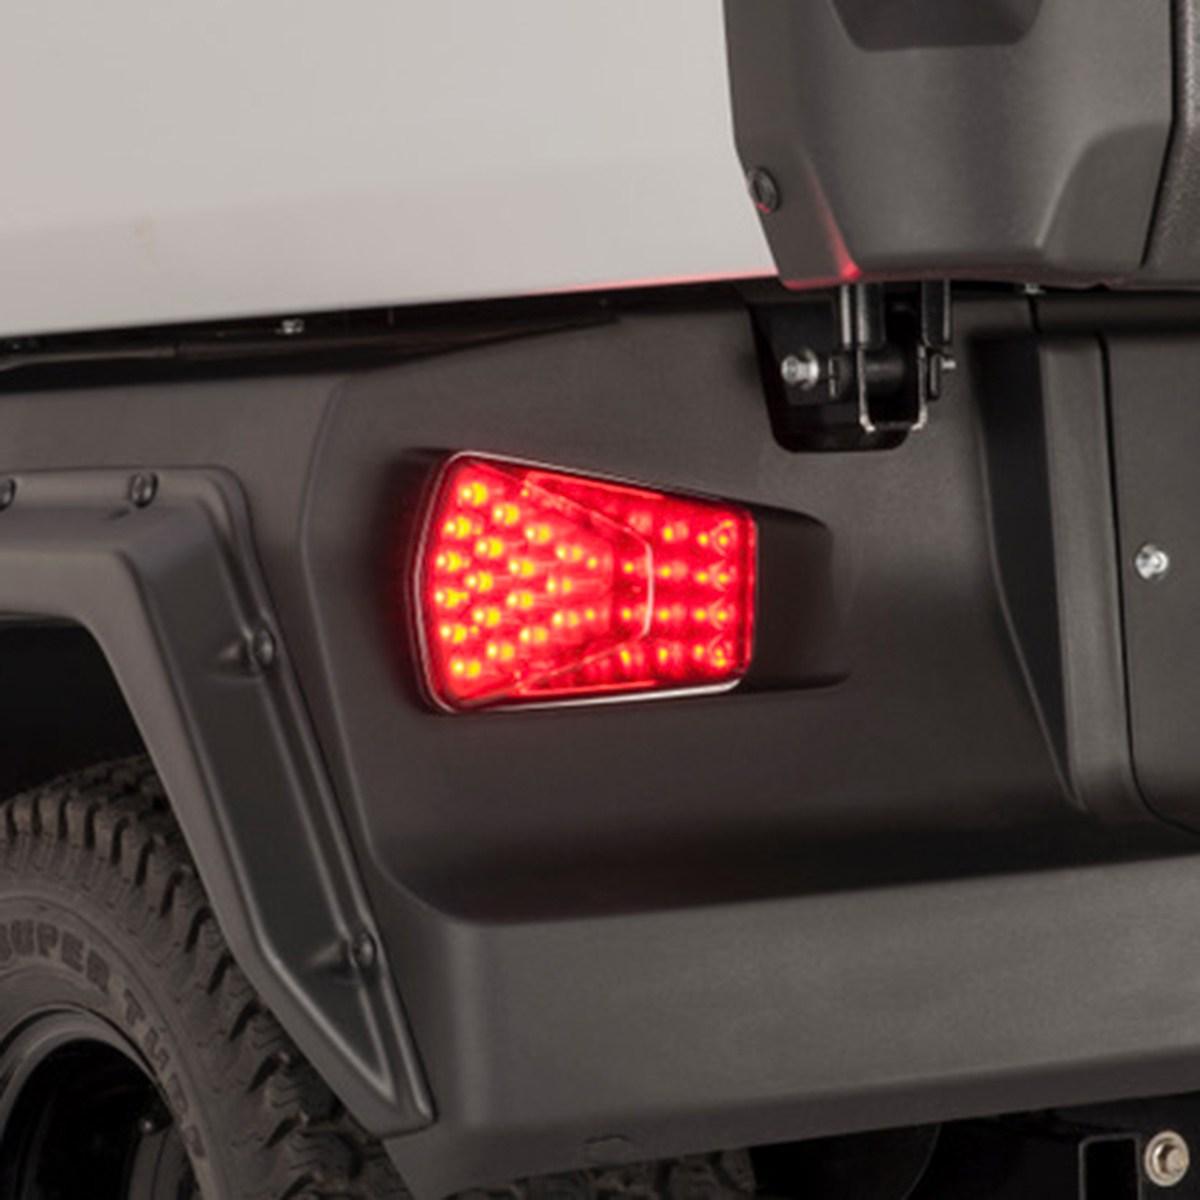 the UMX Rear Taillights make your UMX visible when operating at night or in low-light  conditions. These are outfitted with a  GORE-TEX® patch to prevent moisture or condensation related damage.Stop and turn signal functions require the Premium Upgrade Light Kit (J0G-H4503-T0-00) or the Ultra-Premium Upgrade Light Kit (J0G-H4503-S0-00), both sold separately. Taillights are included in both upgrade kits.